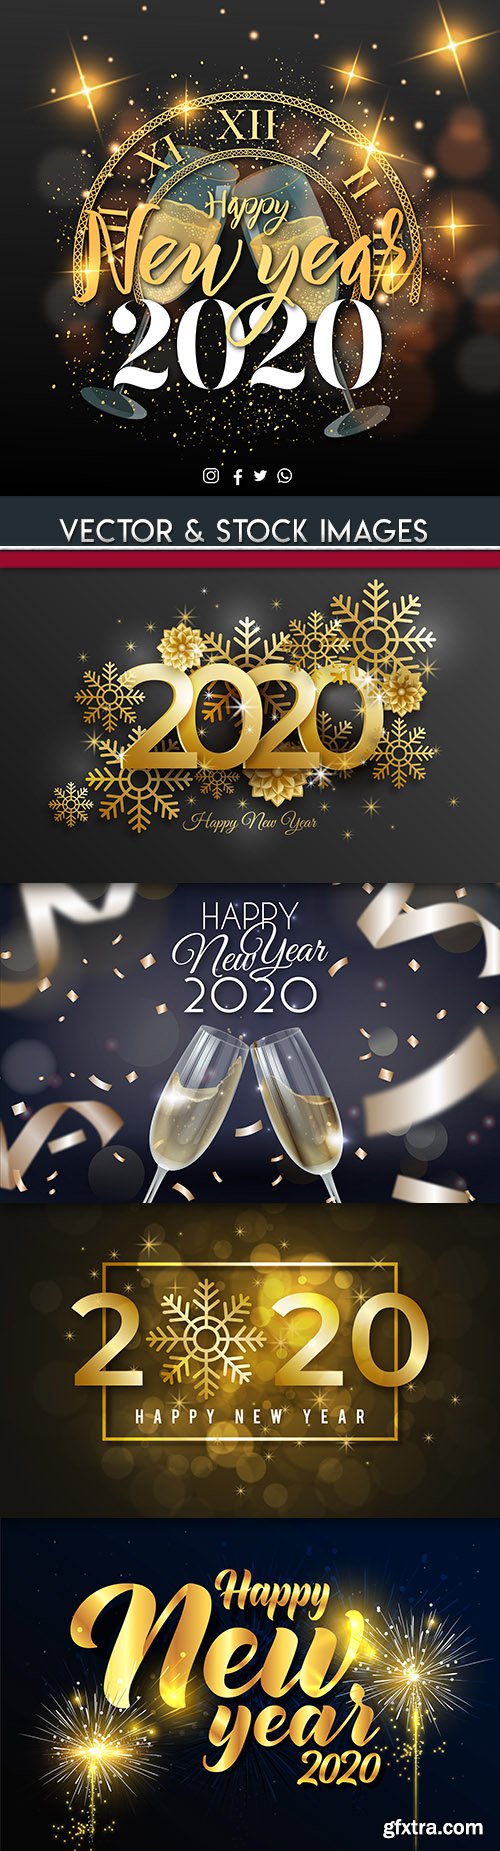 New Year and Christmas decorative 2020 illustration 8